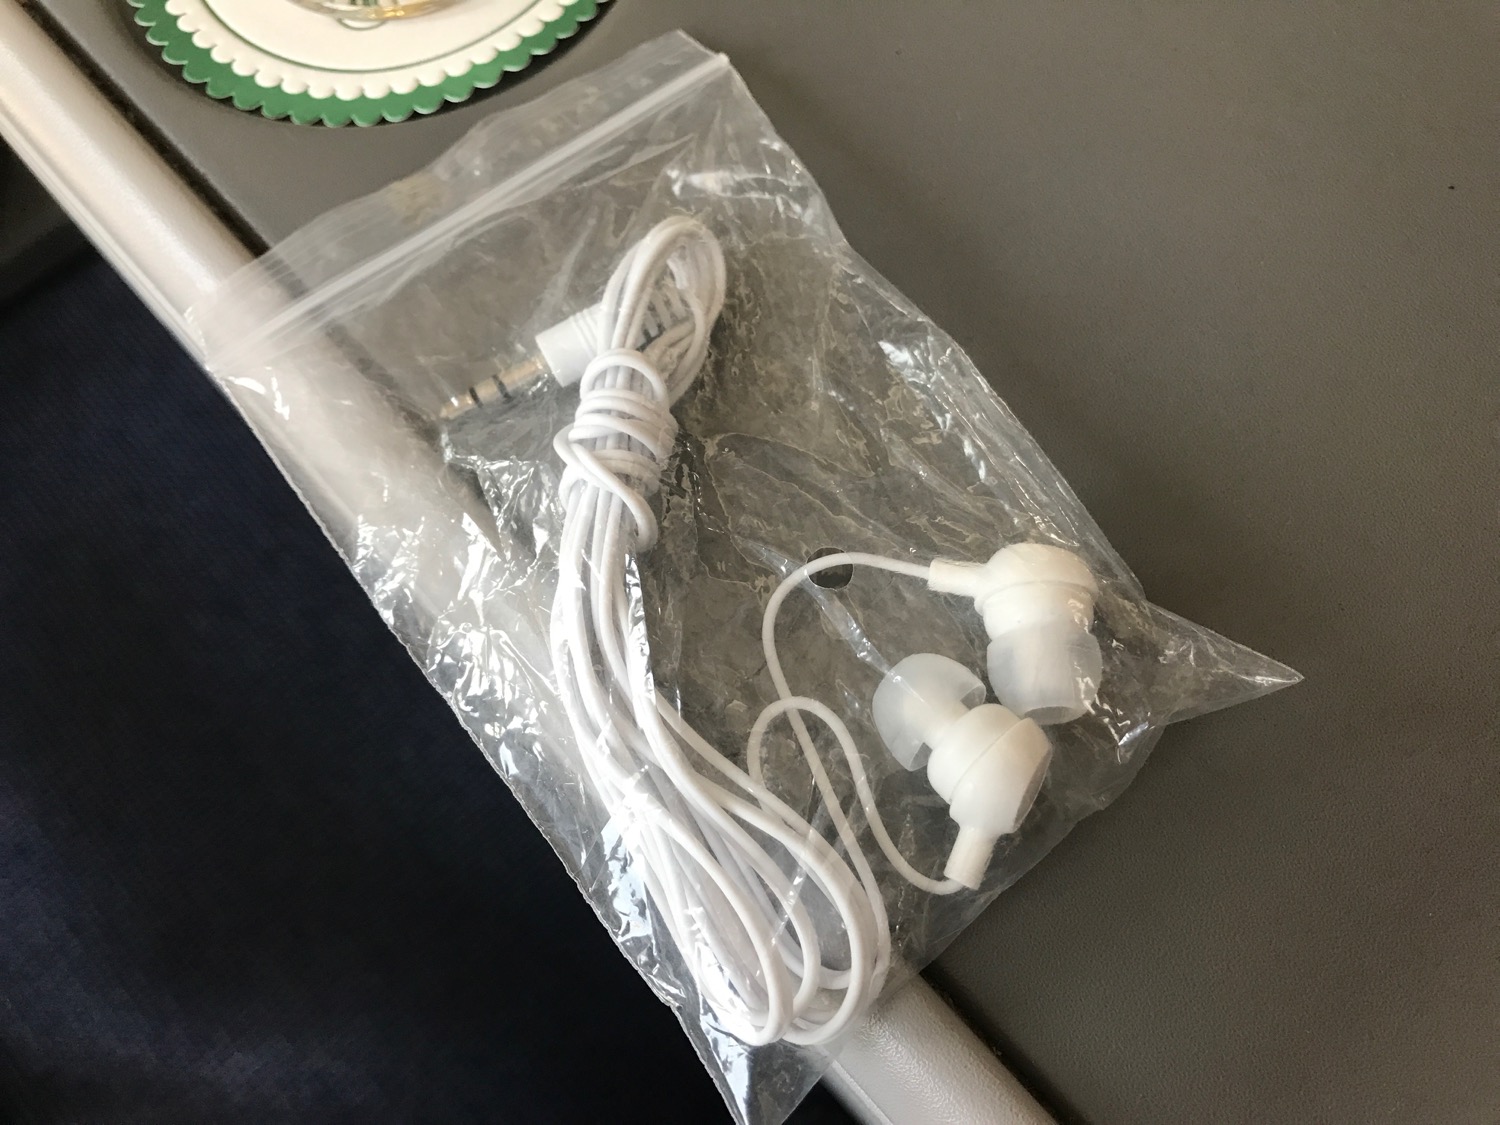 a white earbuds in a plastic bag